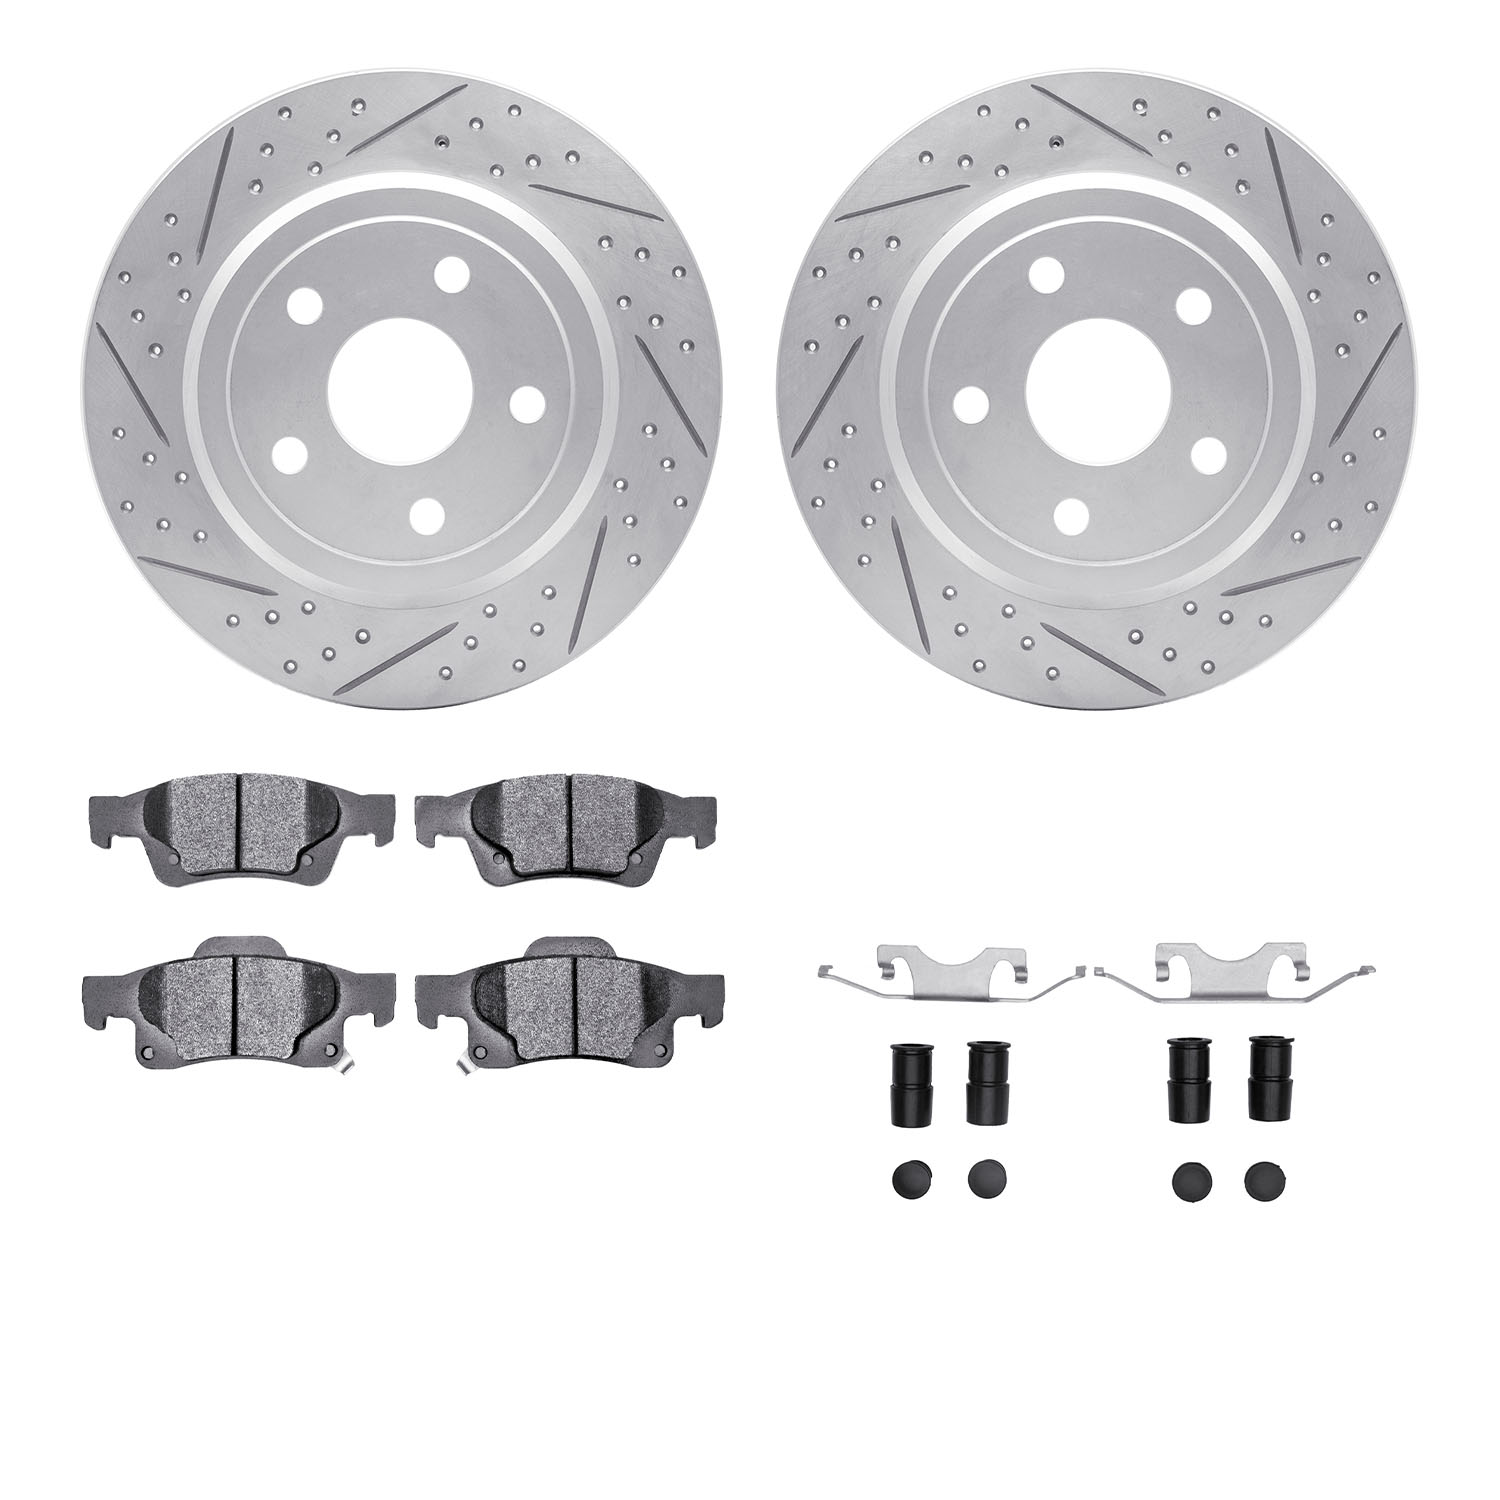 2212-42001 Geoperformance Drilled/Slotted Rotors w/Heavy-Duty Pads Kit & Hardware, Fits Select Mopar, Position: Rear